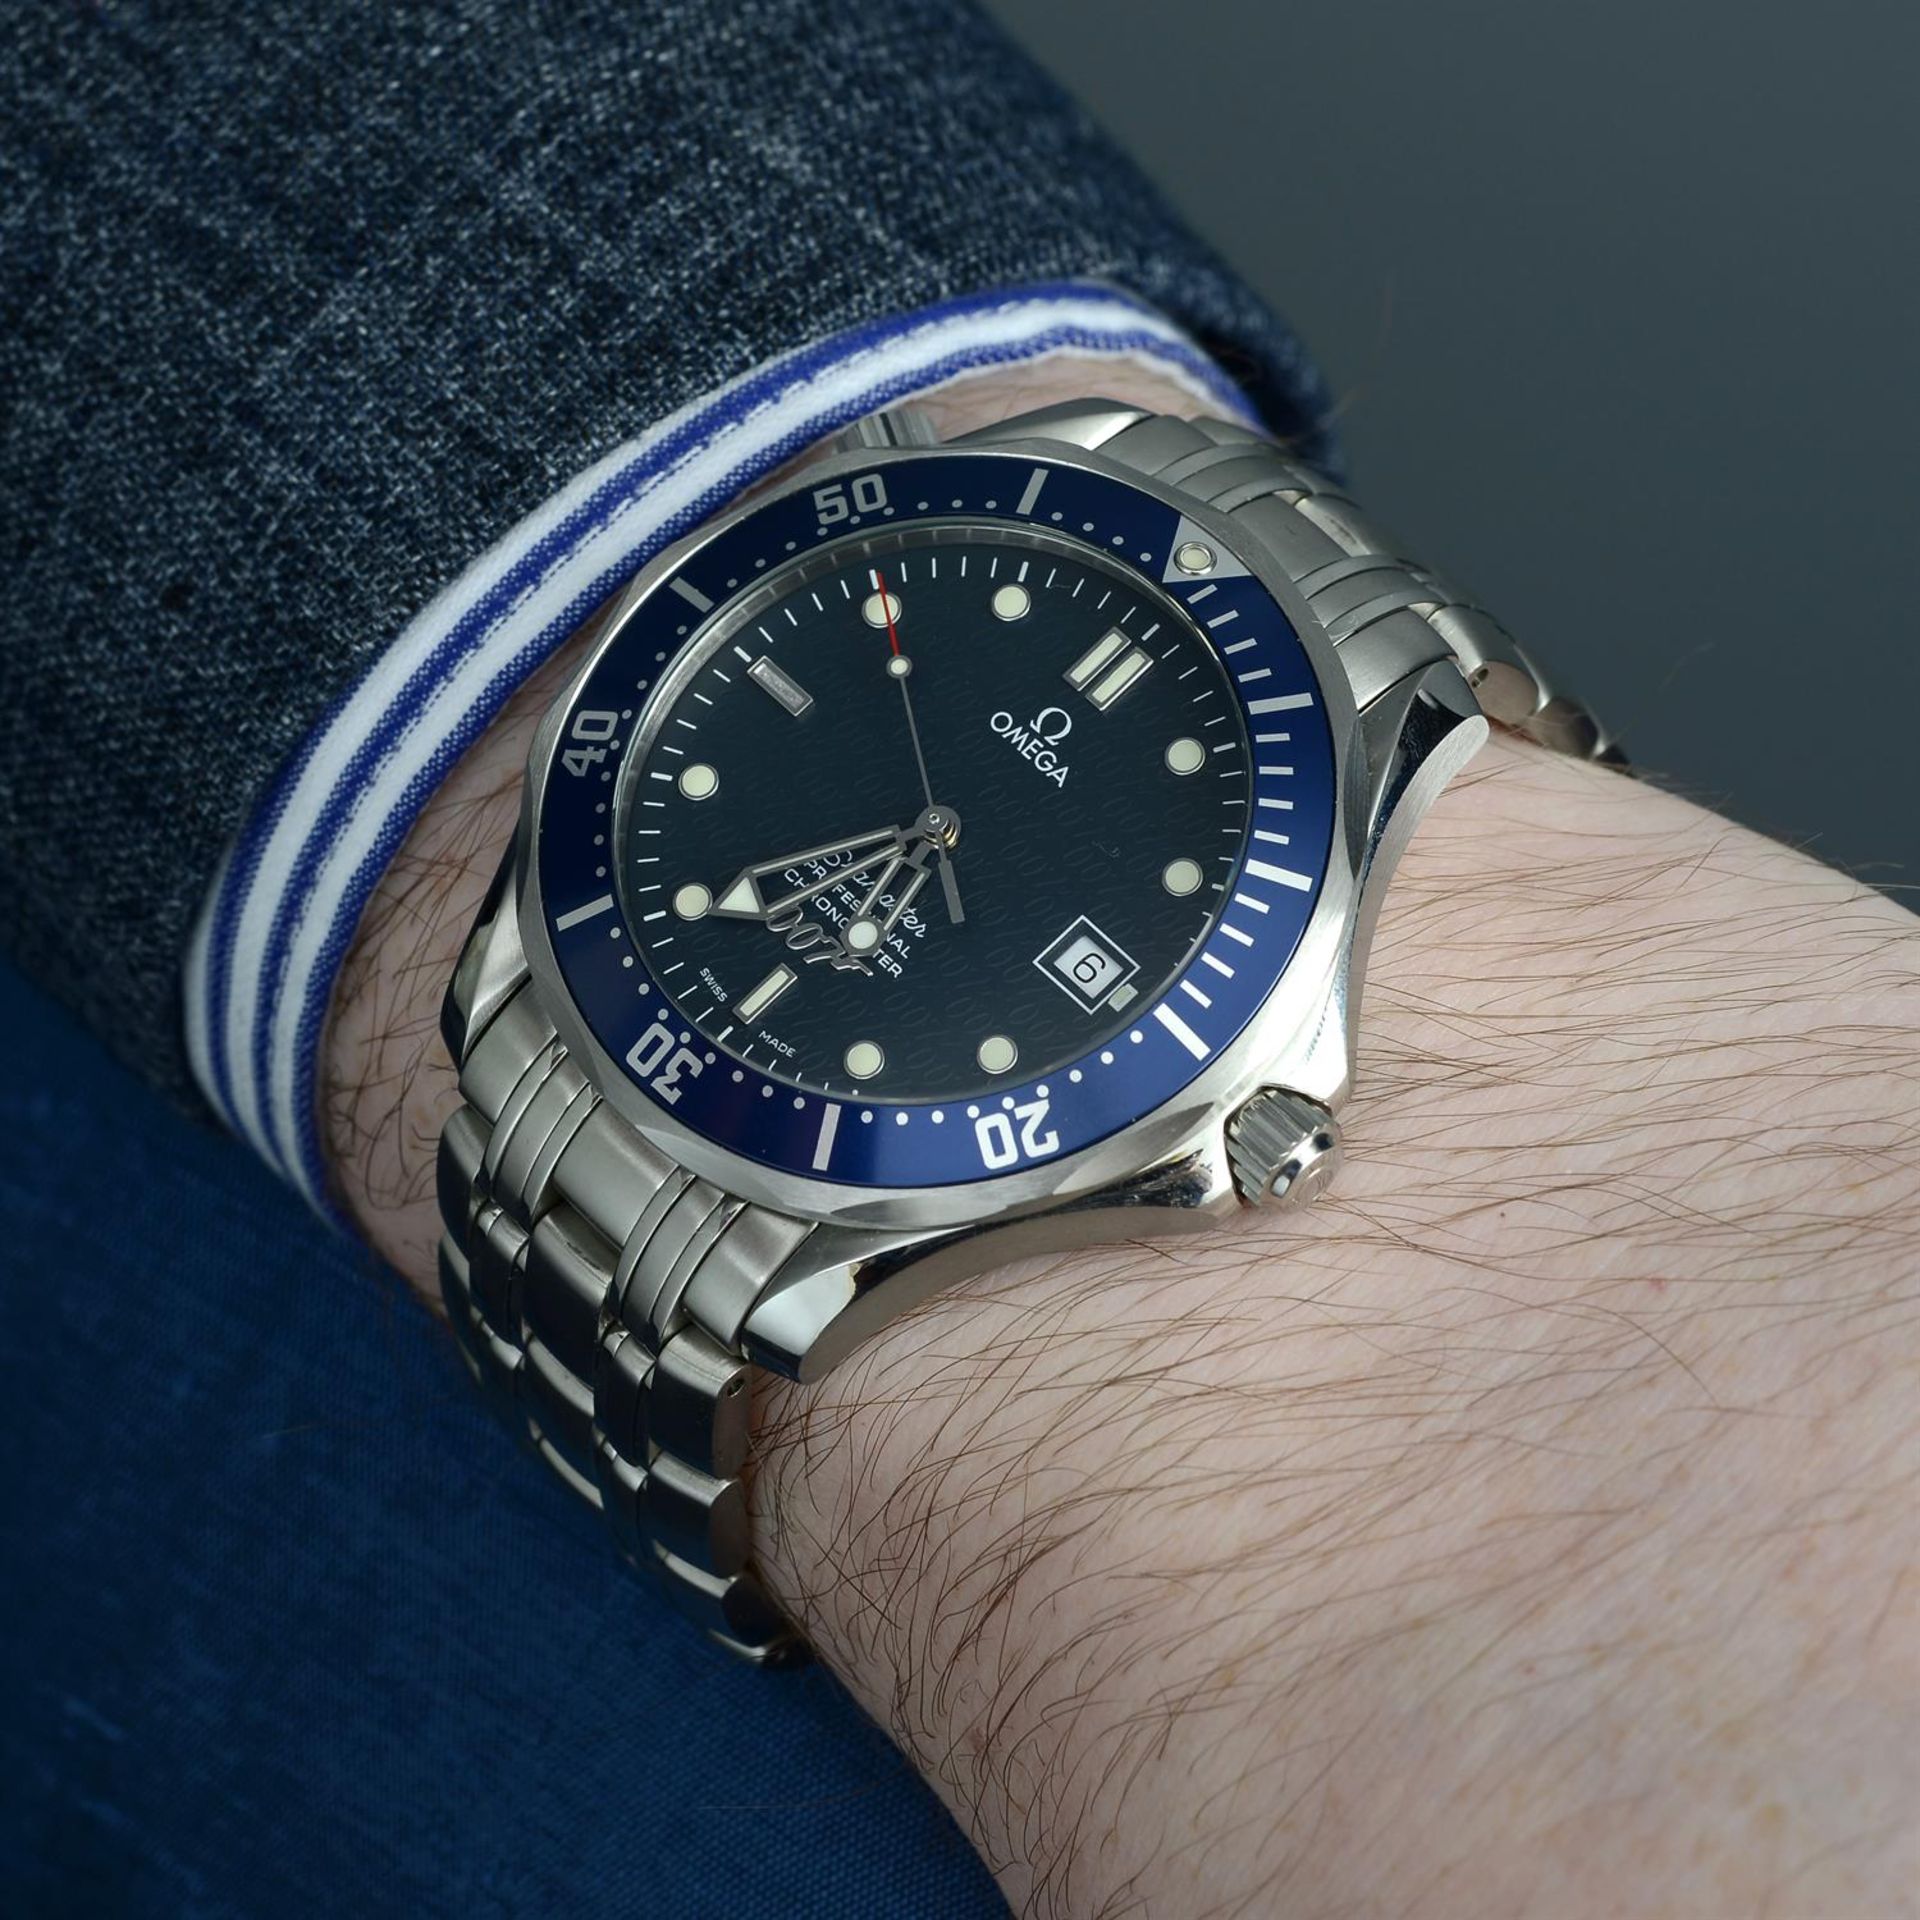 OMEGA - a limited edition stainless steel Seamaster 007 bracelet watch, 41mm. - Image 6 of 7